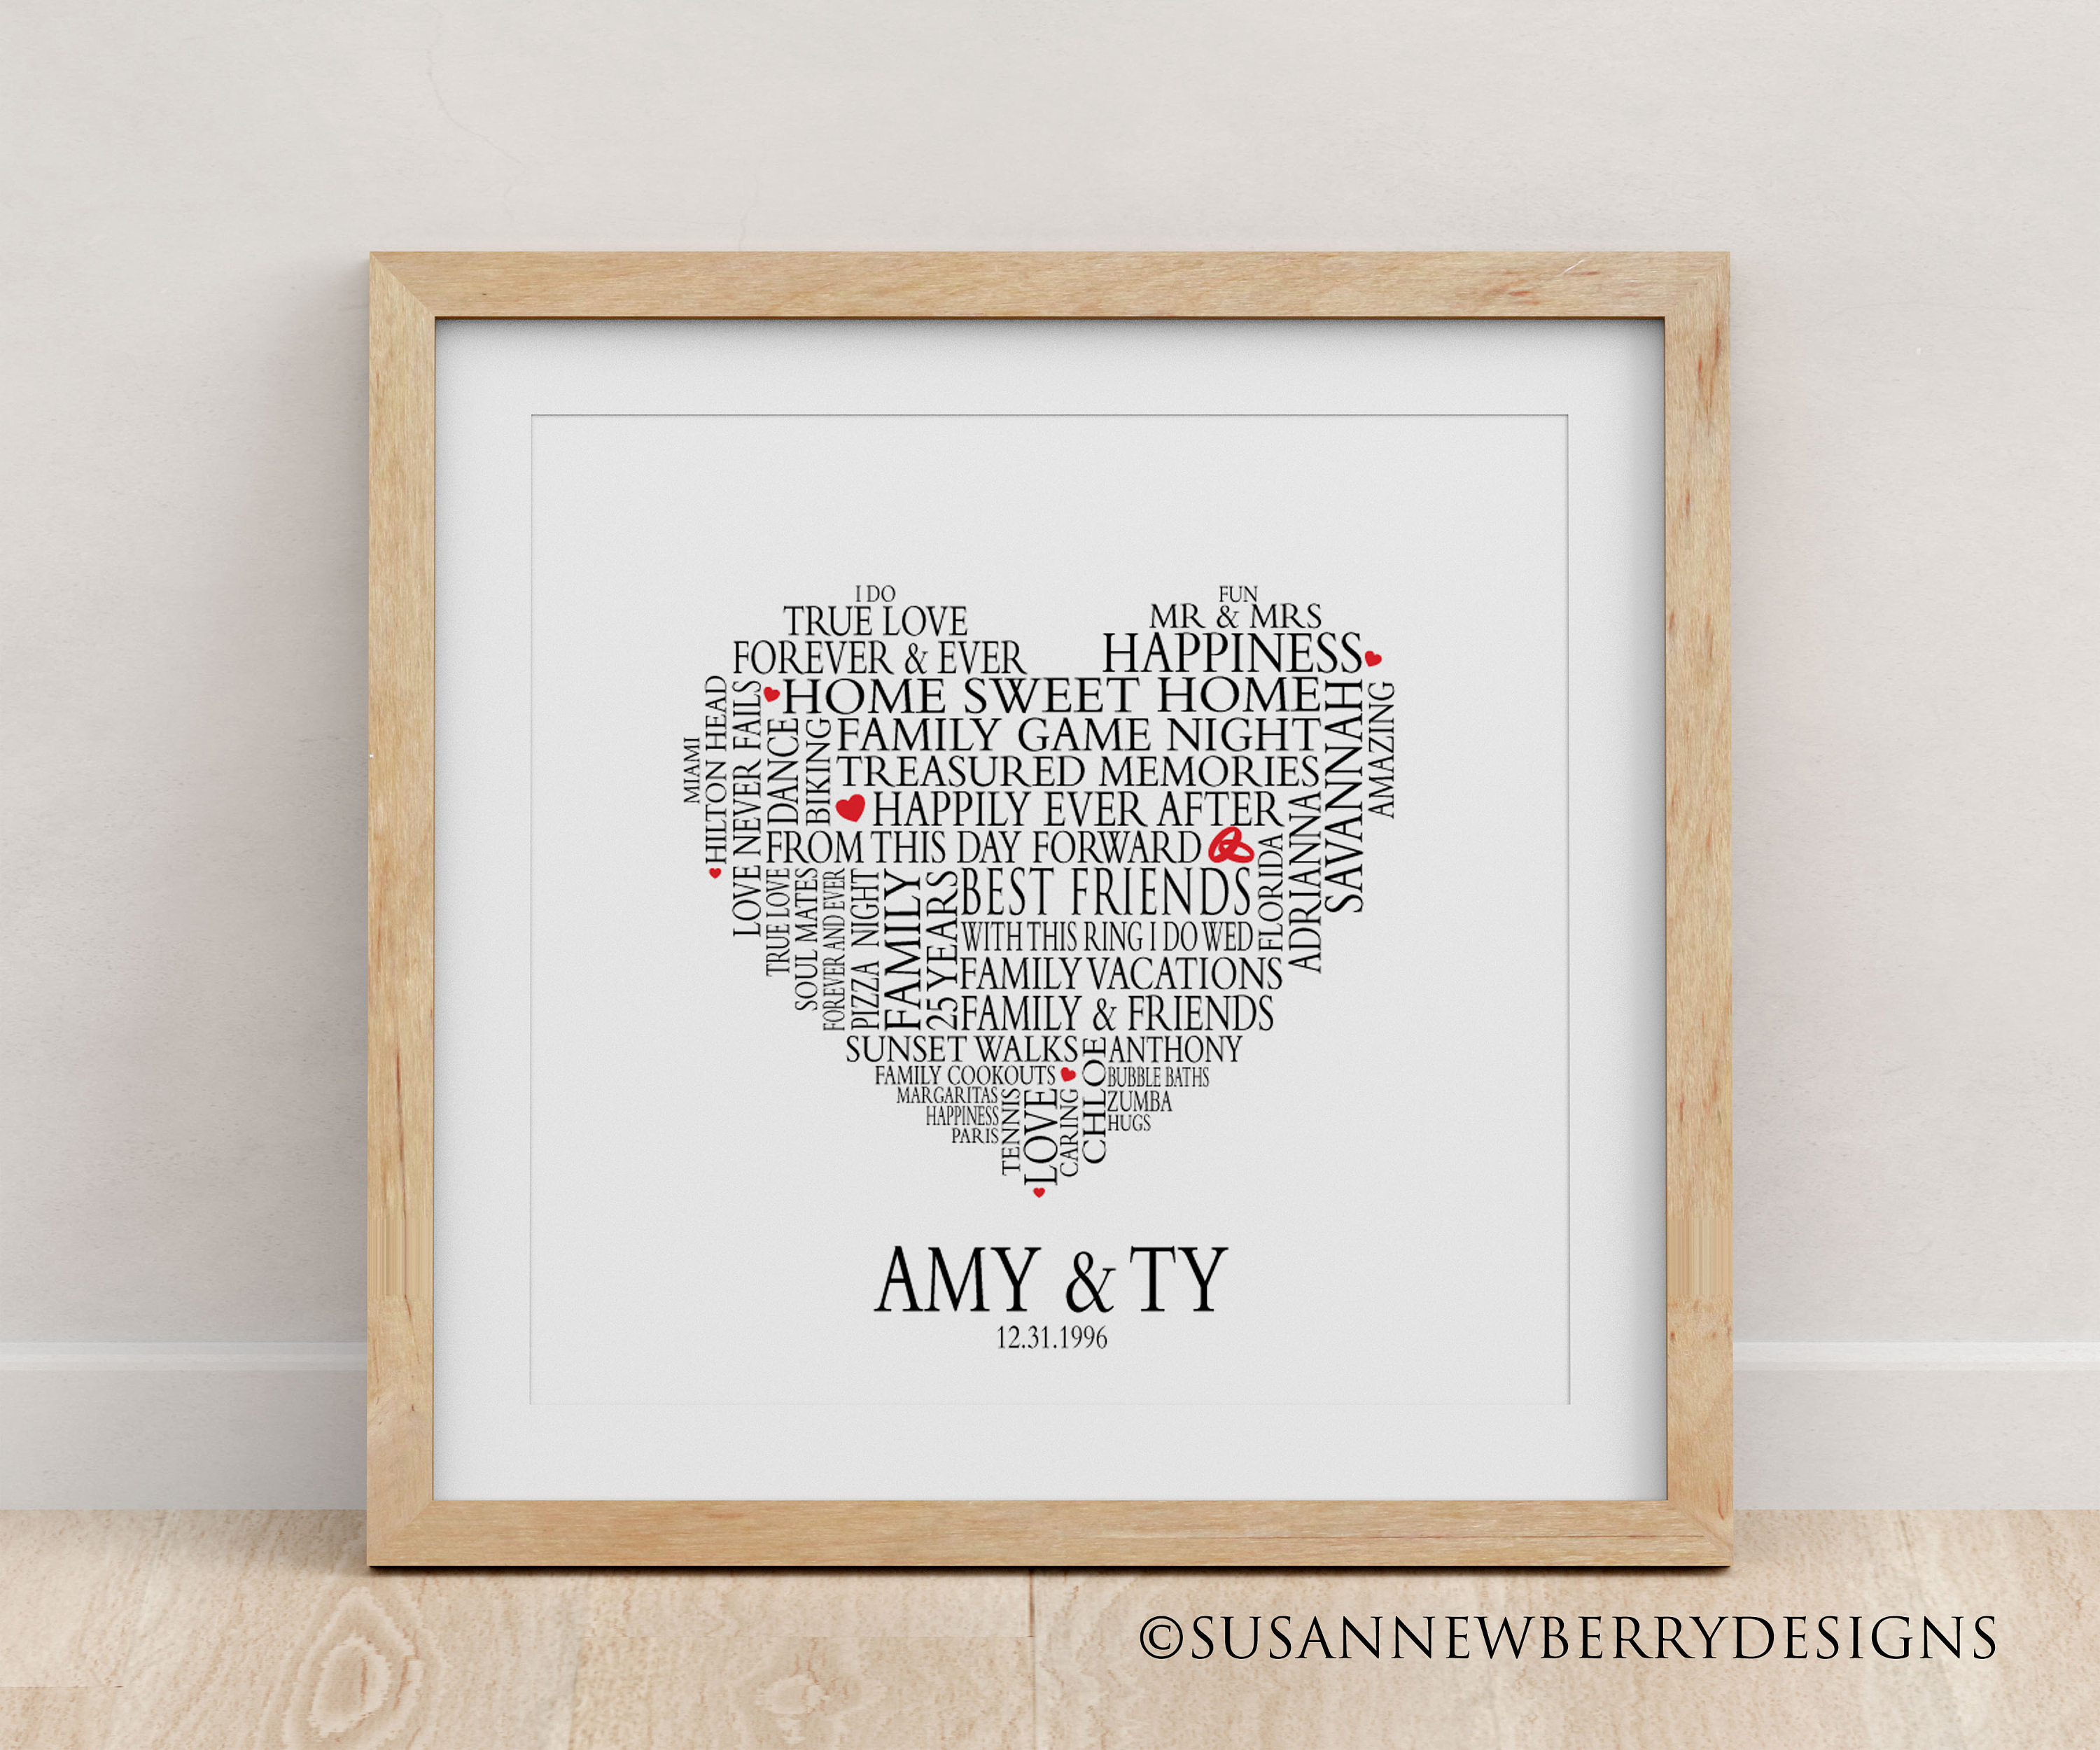 Letter Y Love Heart Monogram Canvas Print for Sale by TheMonogramShop